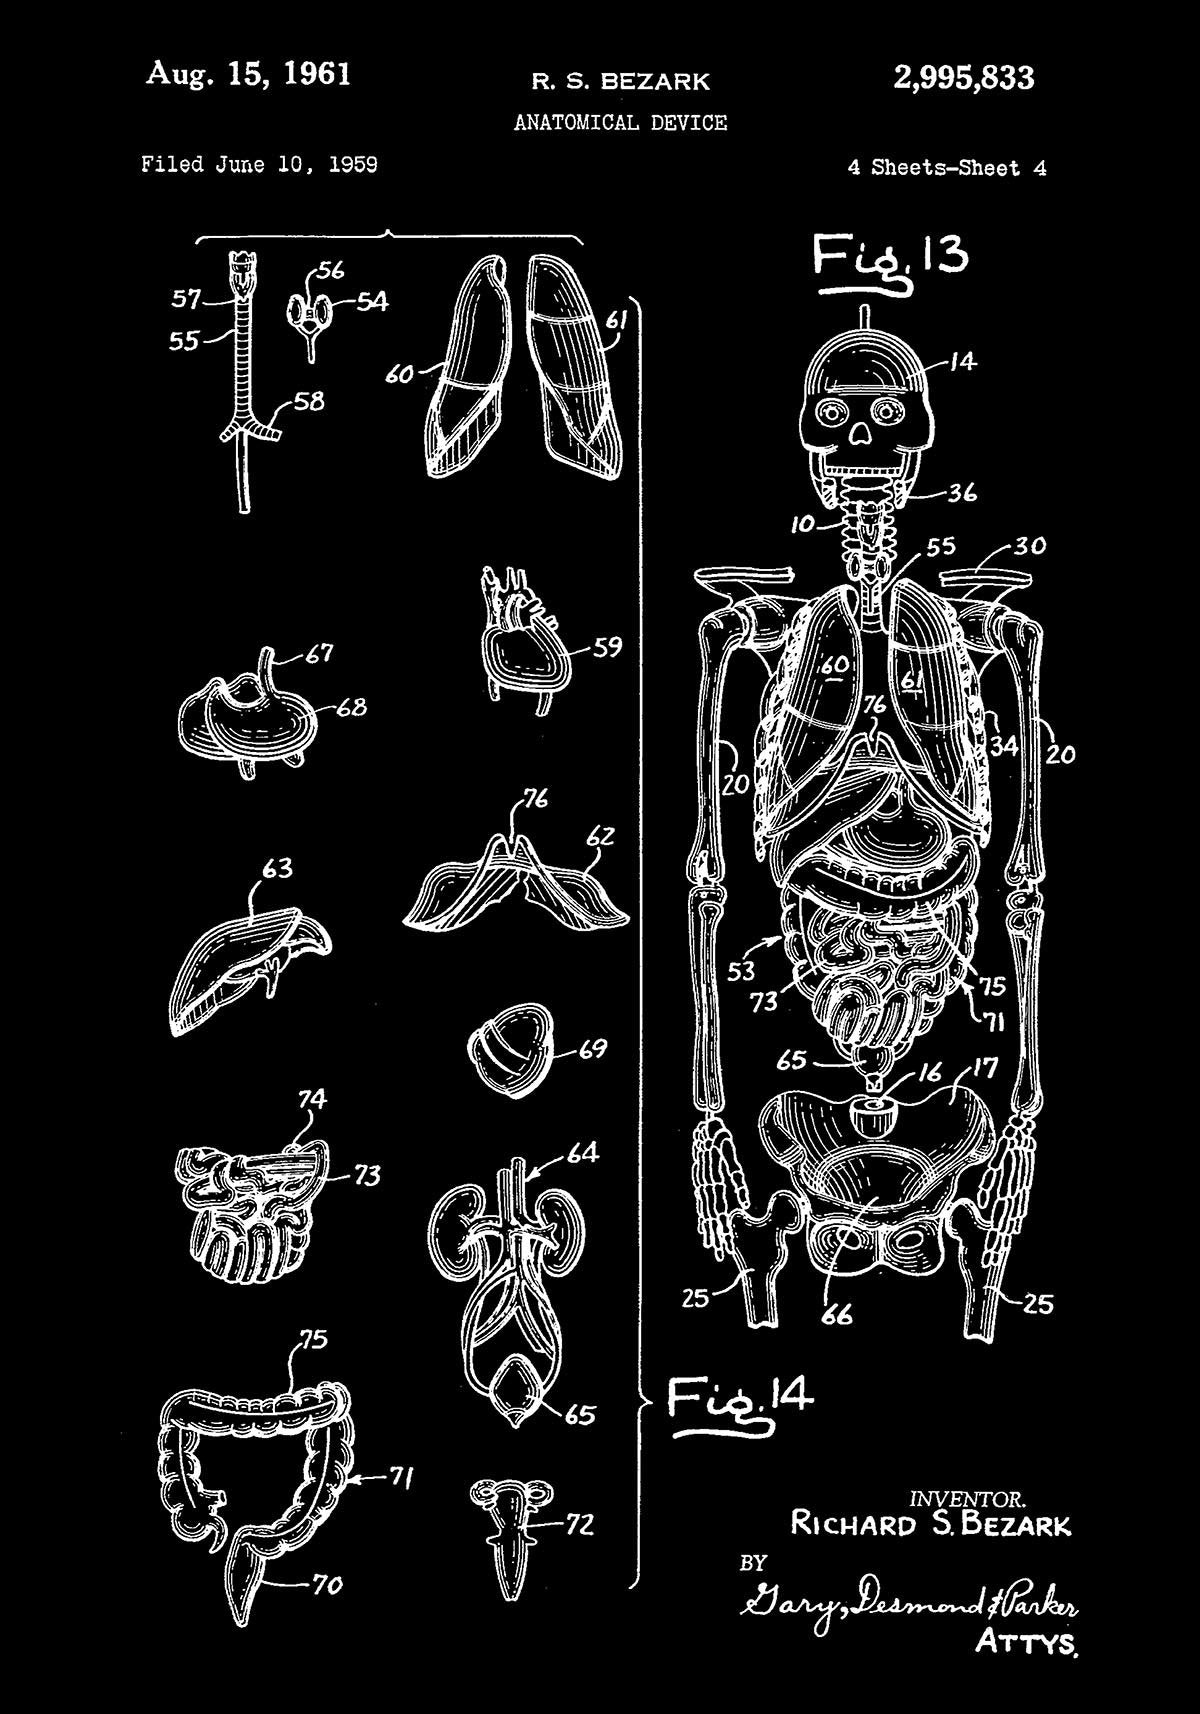 Anatomical Device Patent Poster